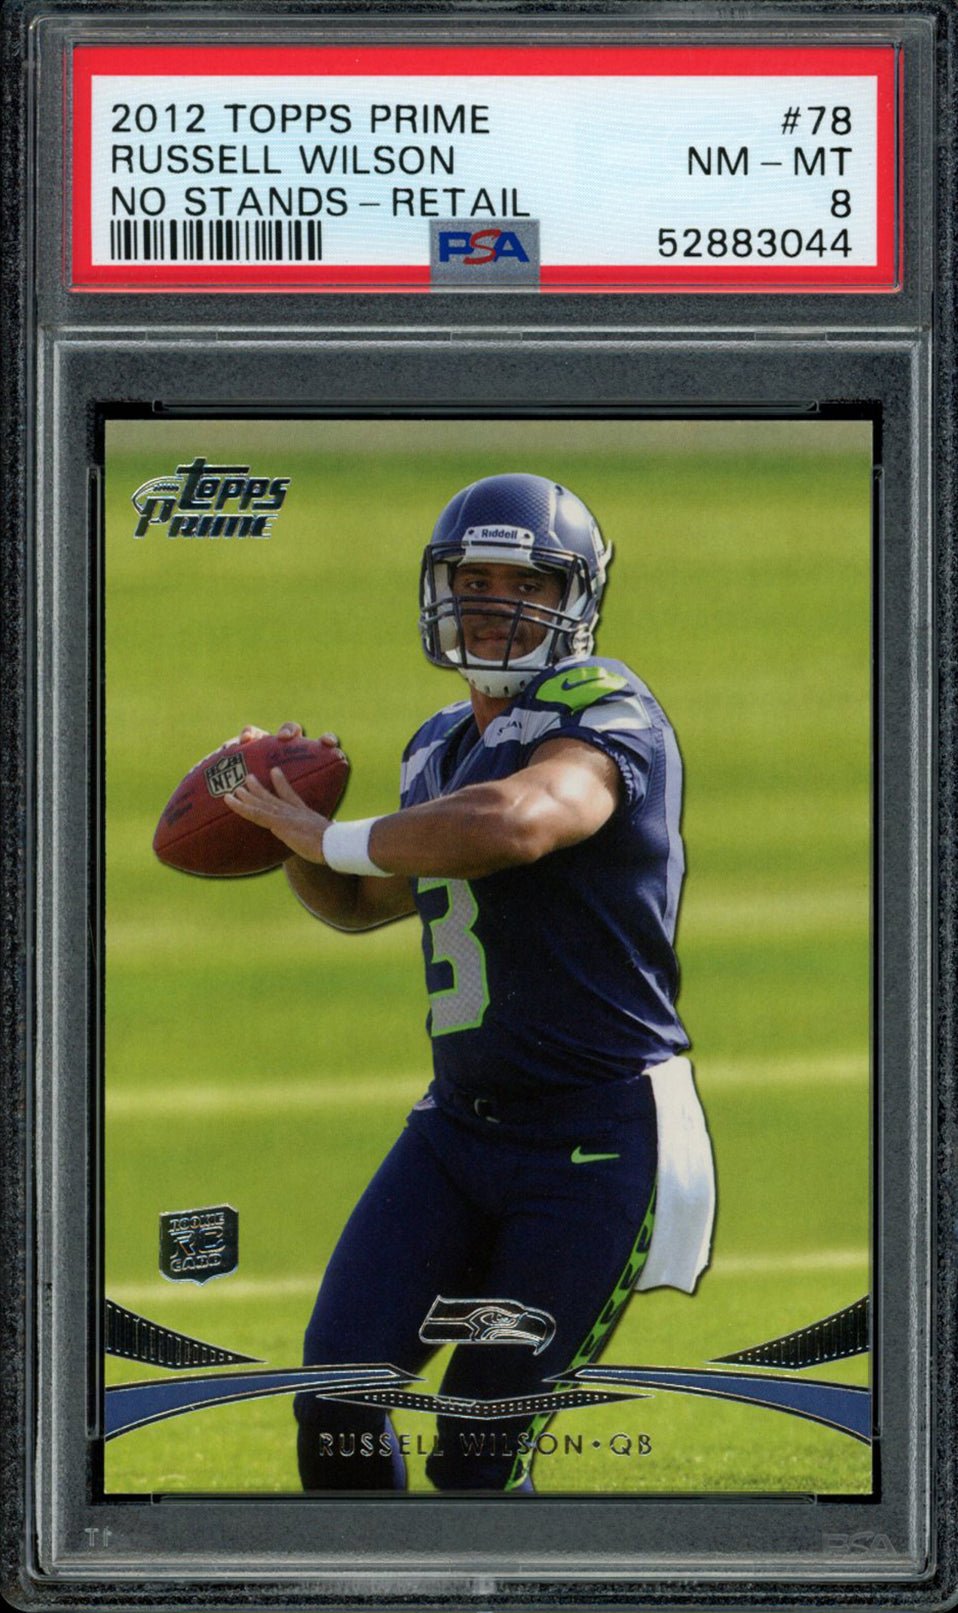 RUSSELL WILSON PSA 8 2012 Topps Prime RC No Stands Retail #78 Football Base Graded Cards RC - Hobby Gems